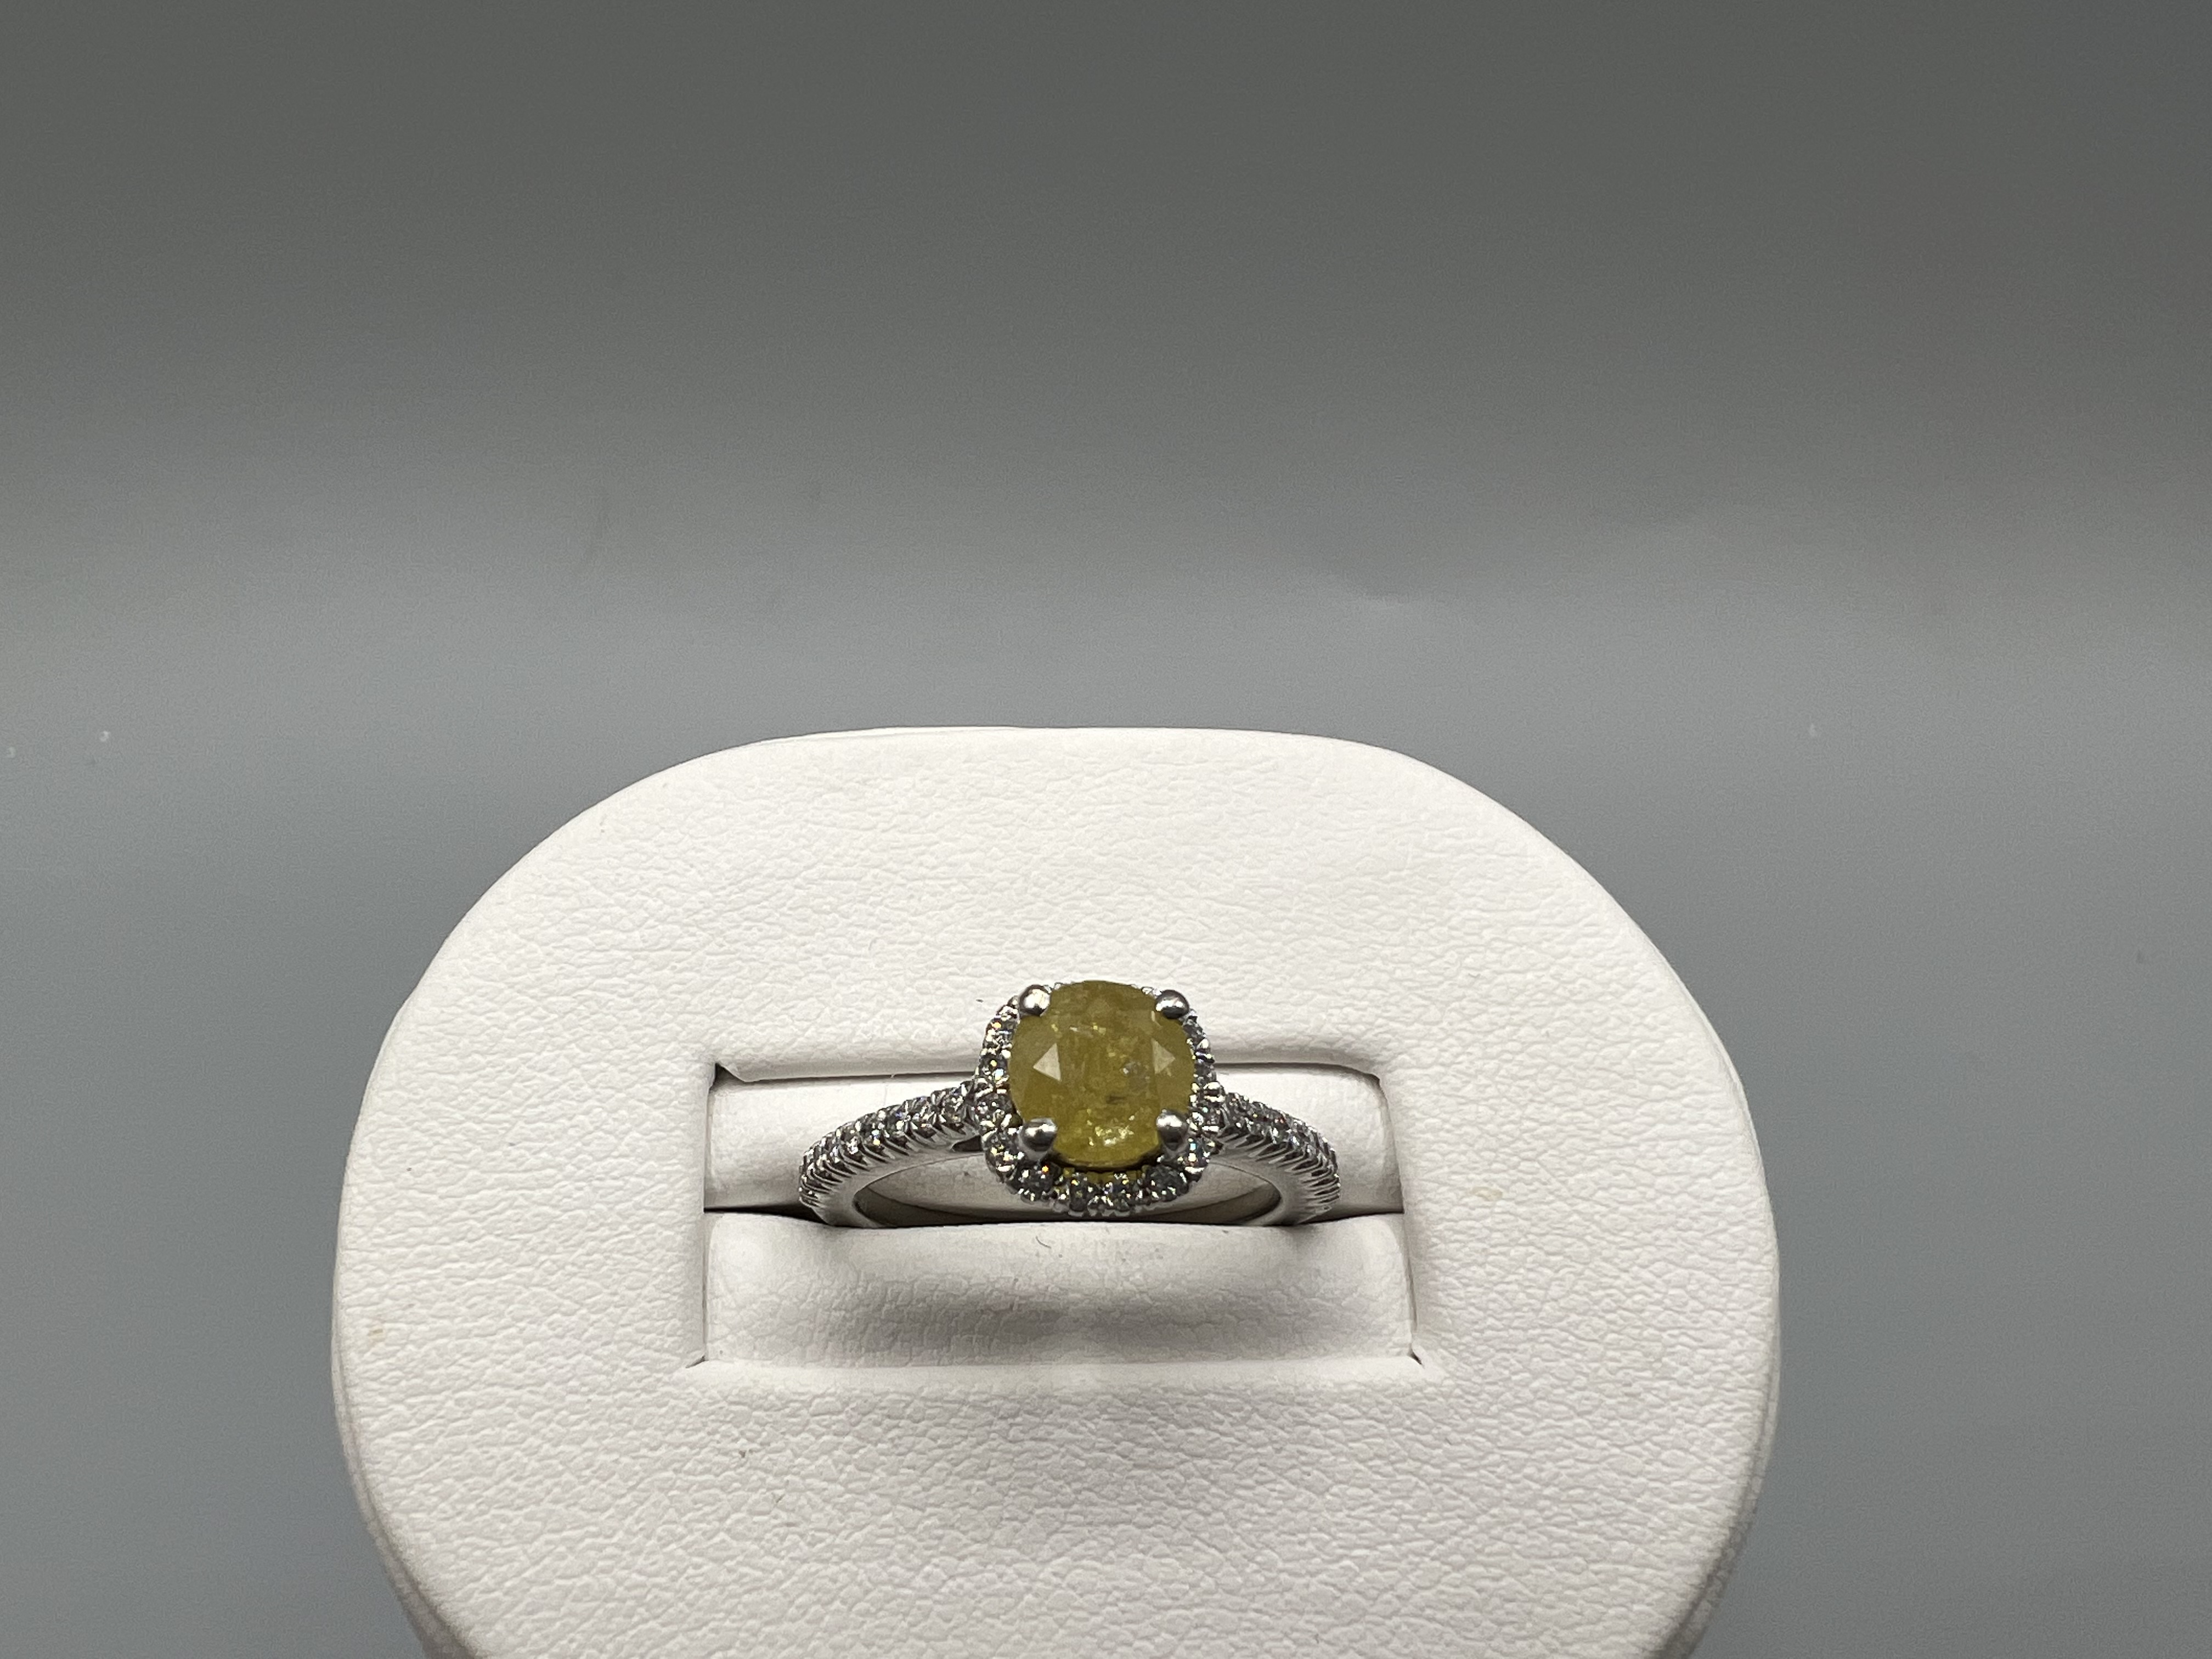 0.97ct Natural Fancy Intense Yellow Certified Diamond Ring in 14ct White Gold & Diamond Mount - - Image 3 of 4